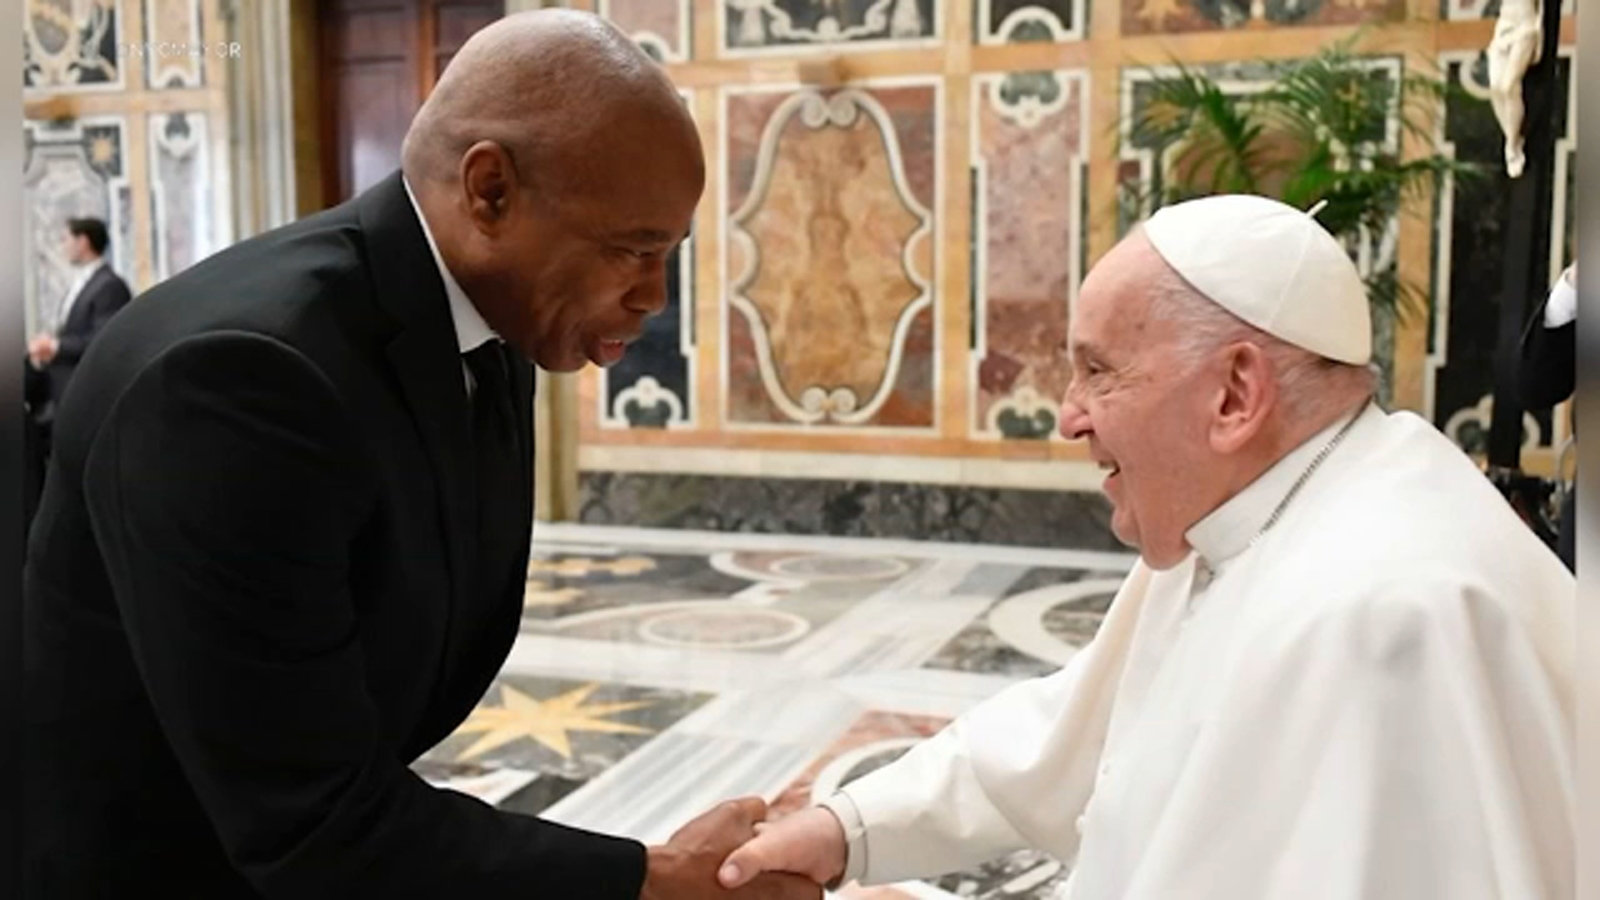 NYC Mayor in Rome: Eric Adams meets with Pope Francis at the Vatican, talks global issues during papal visit [Video]